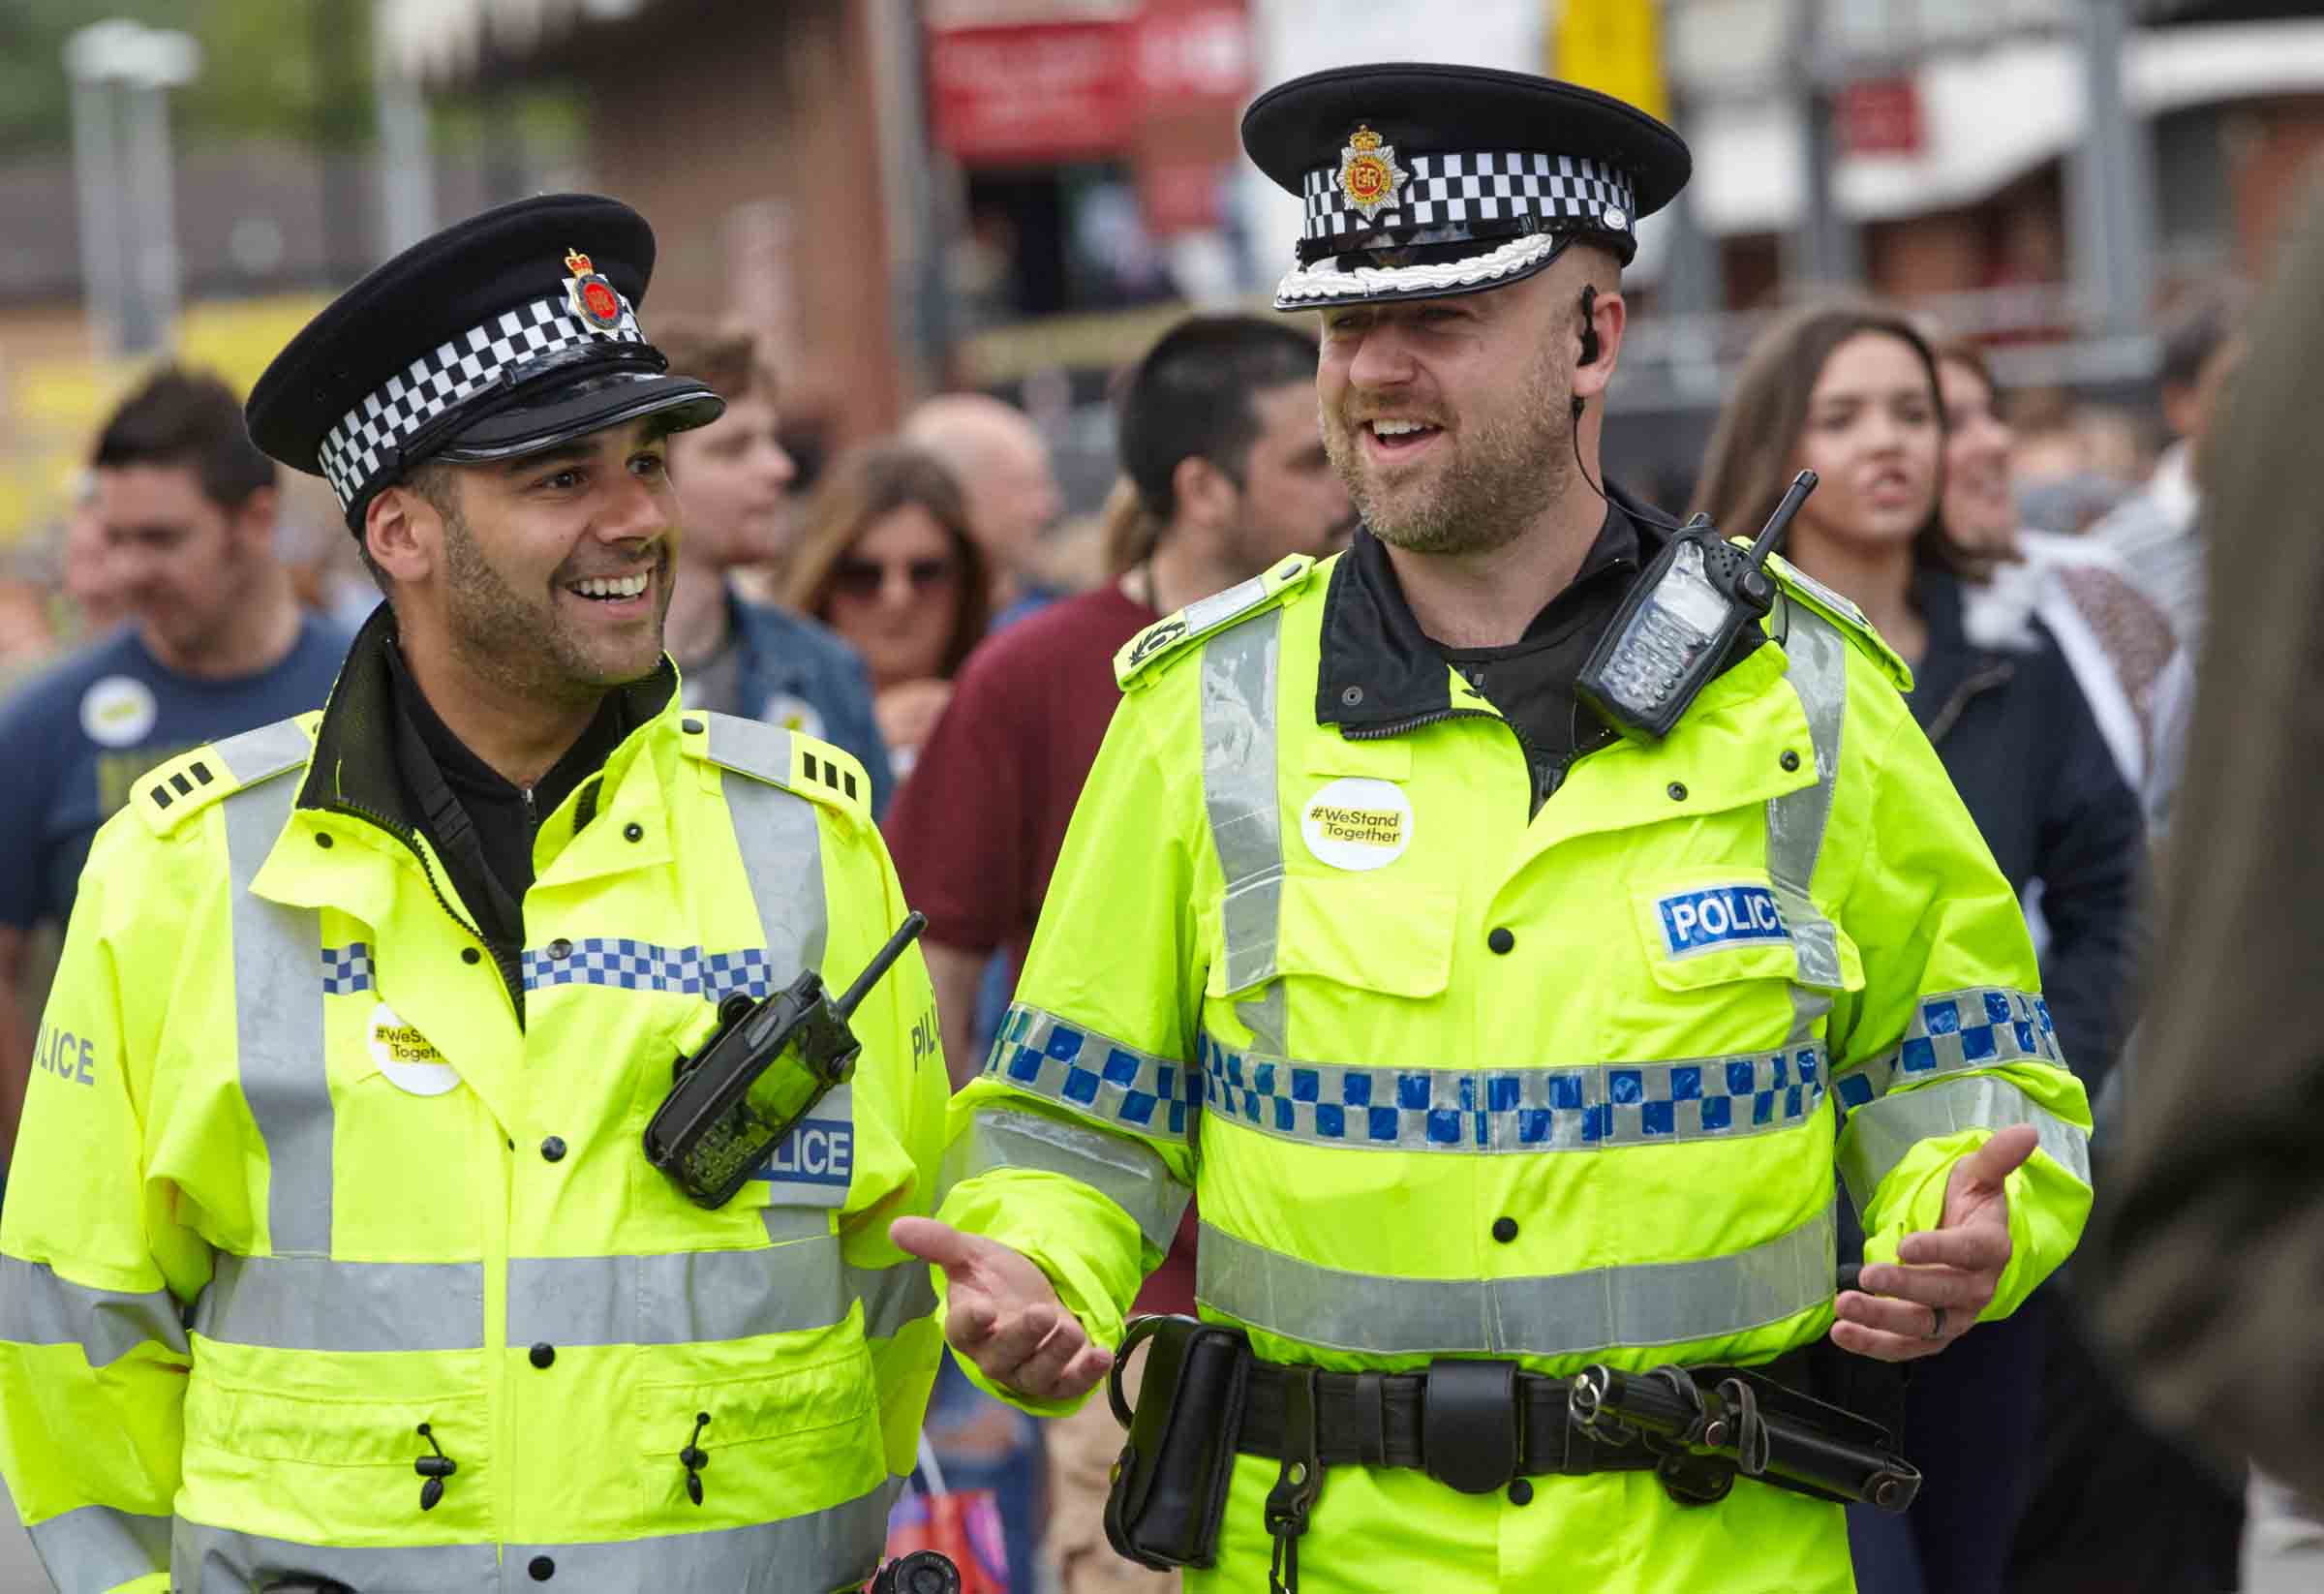 A photograph shows two police officers at the One Love concert in Manchester in 2017